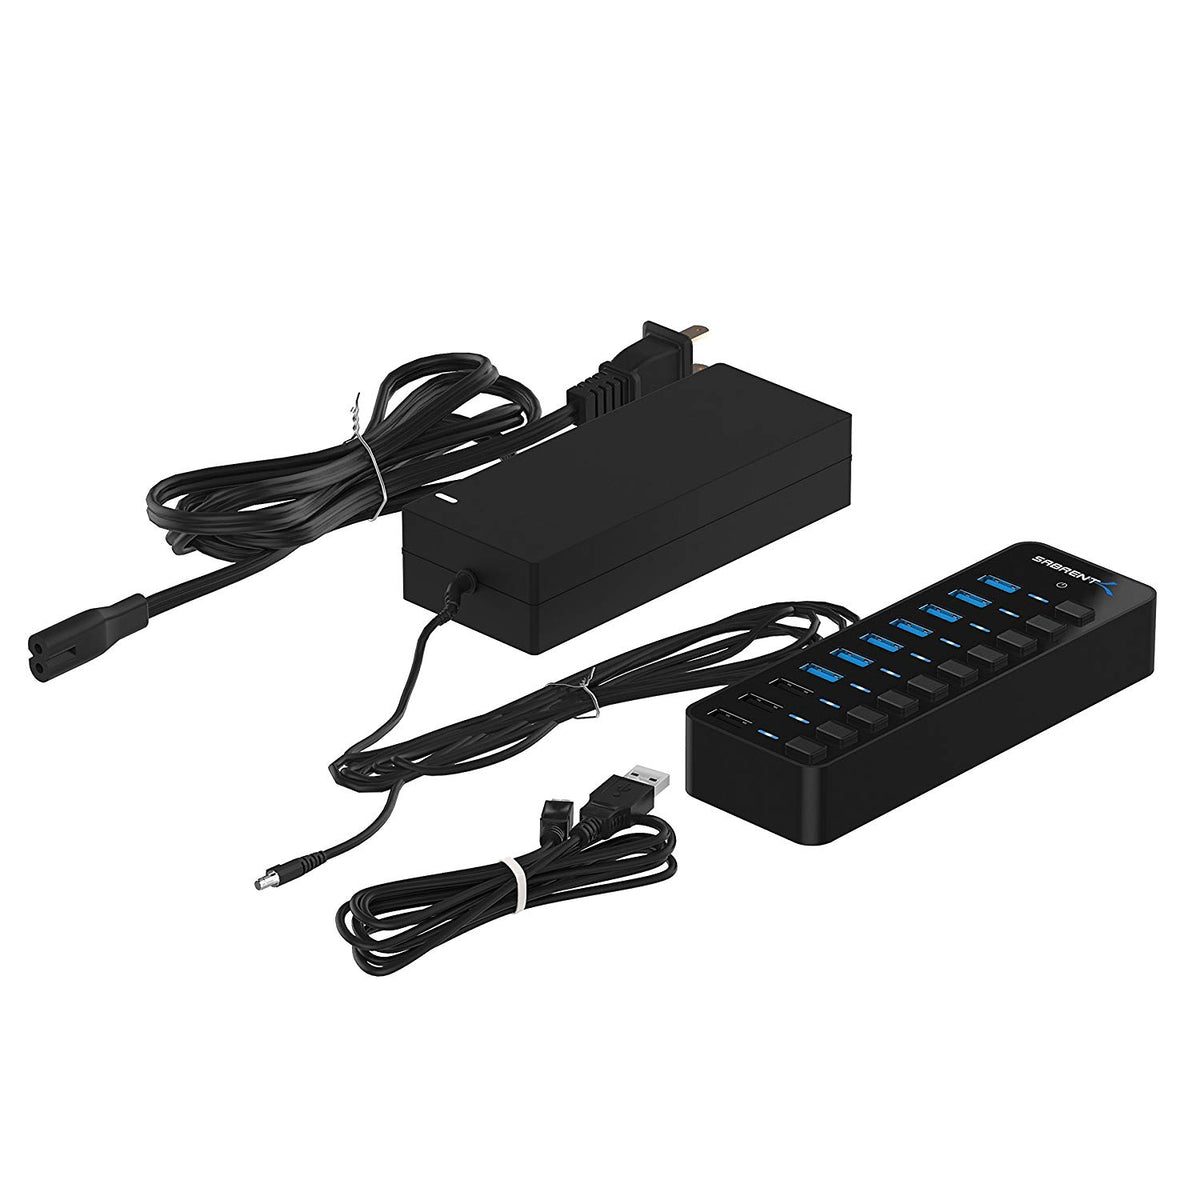 USB 3.0 Hub With Power Switches